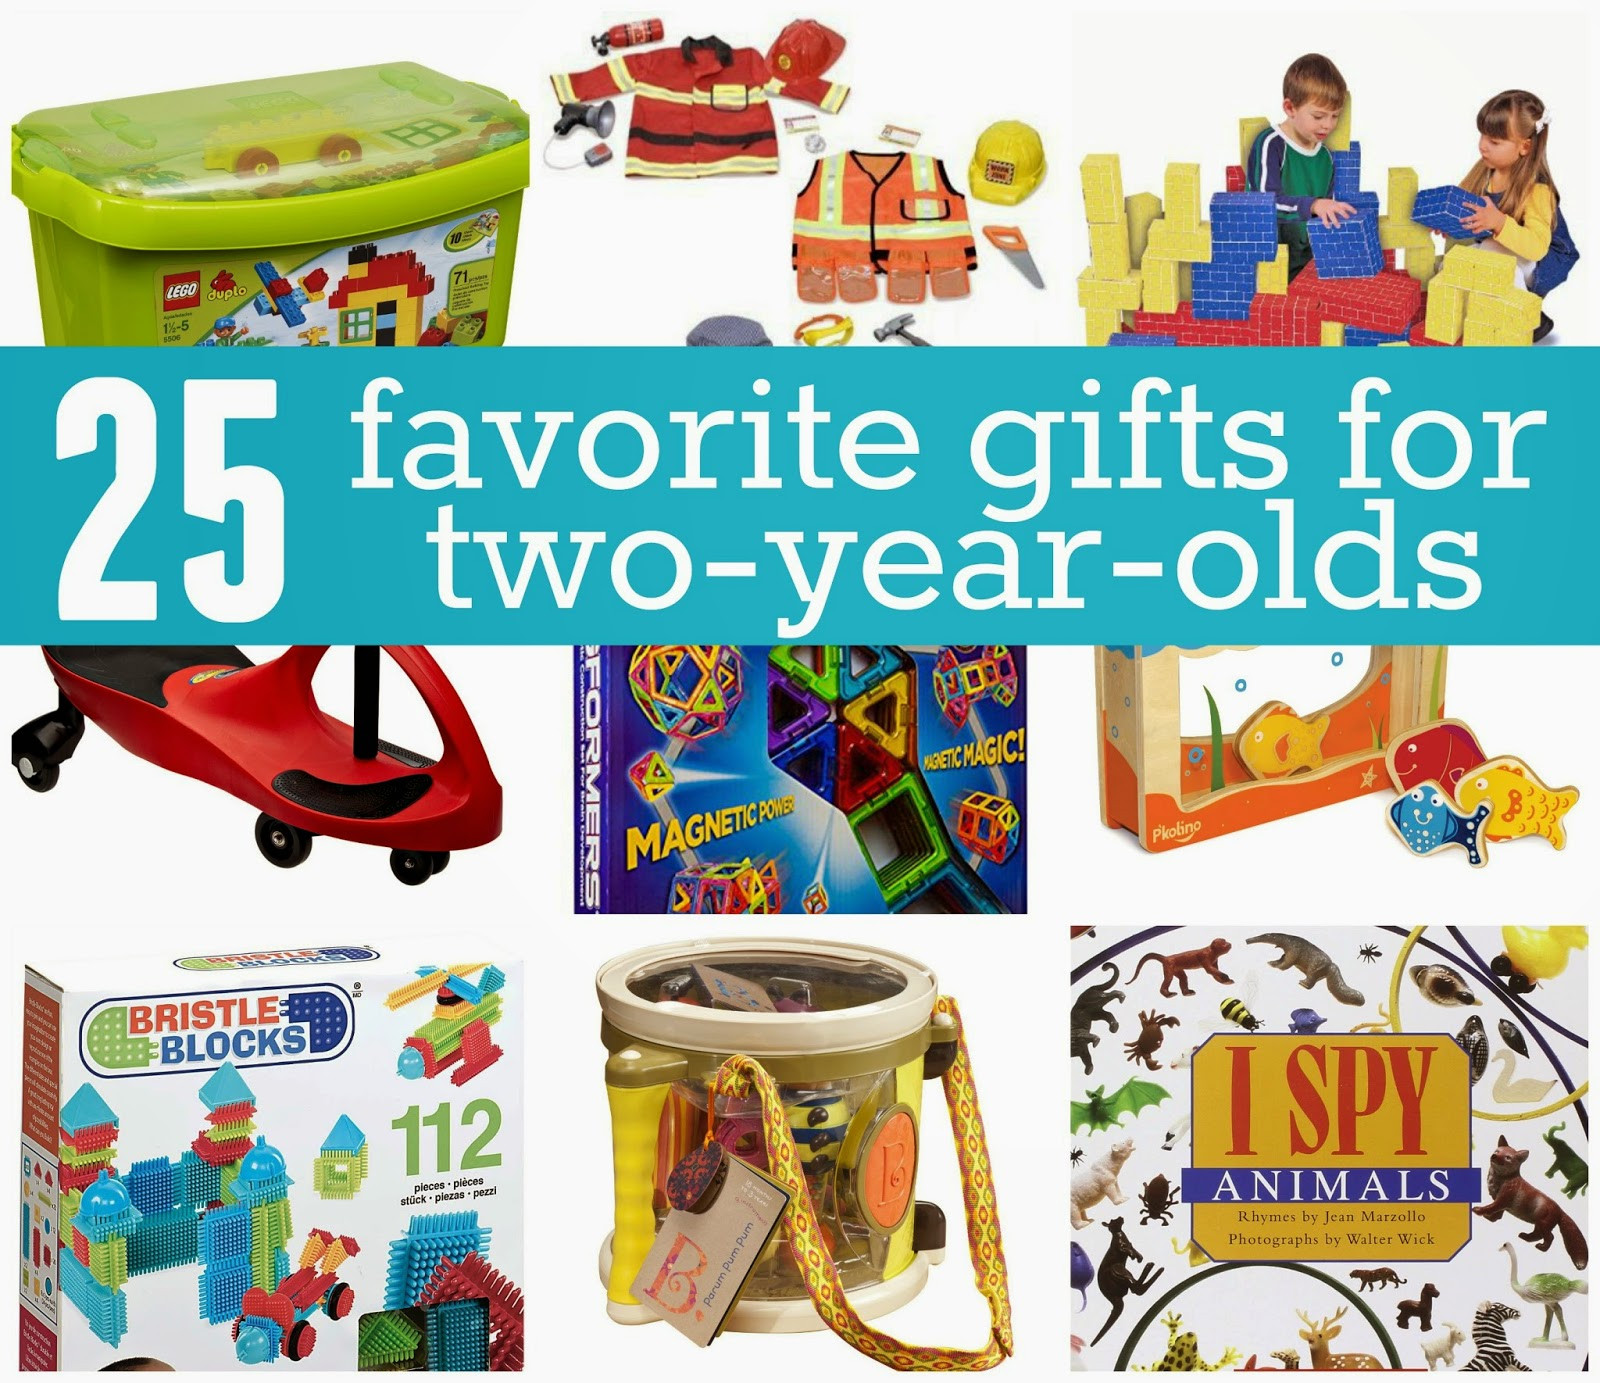 Best Gift Ideas For 2 Year Old Boy
 Toddler Approved Favorite Gifts for 2 Year Olds